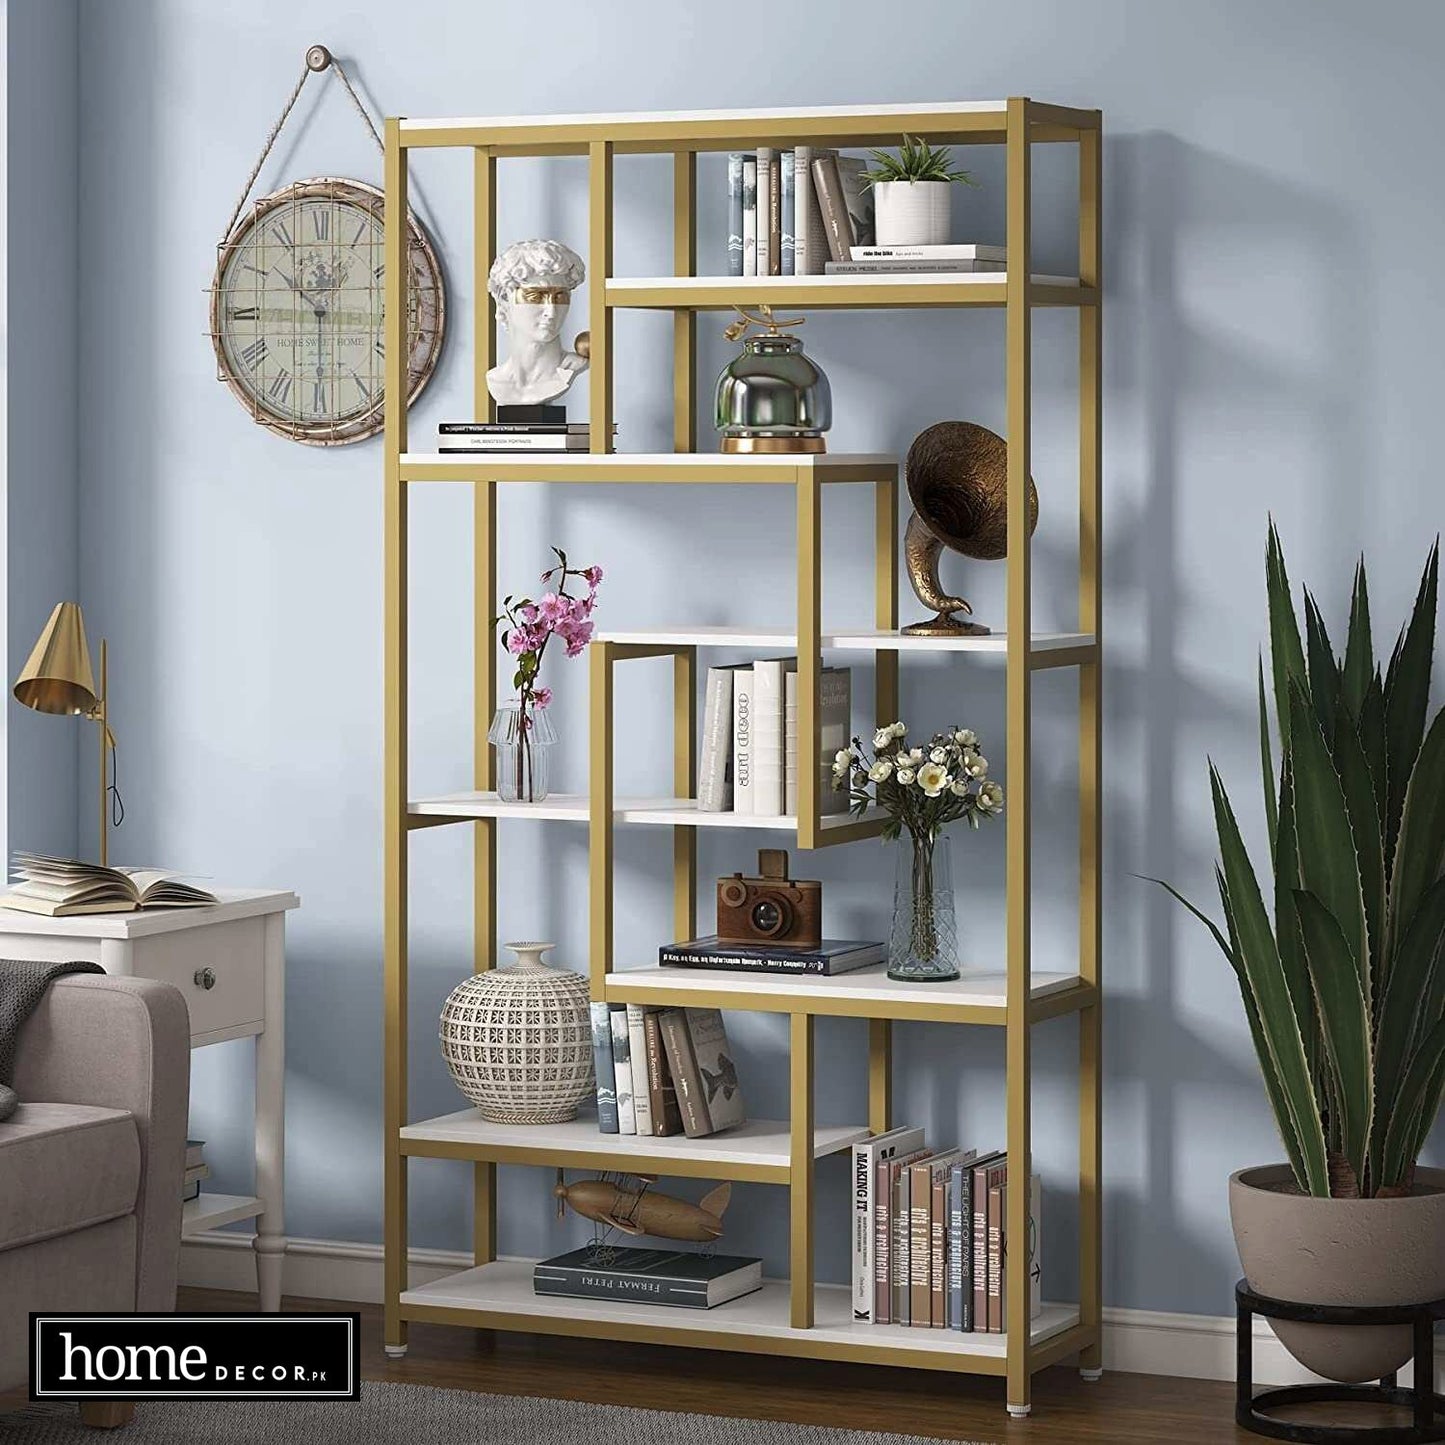 8-Shelves Staggered Bookshelf, Rustic Industrial Bookcase